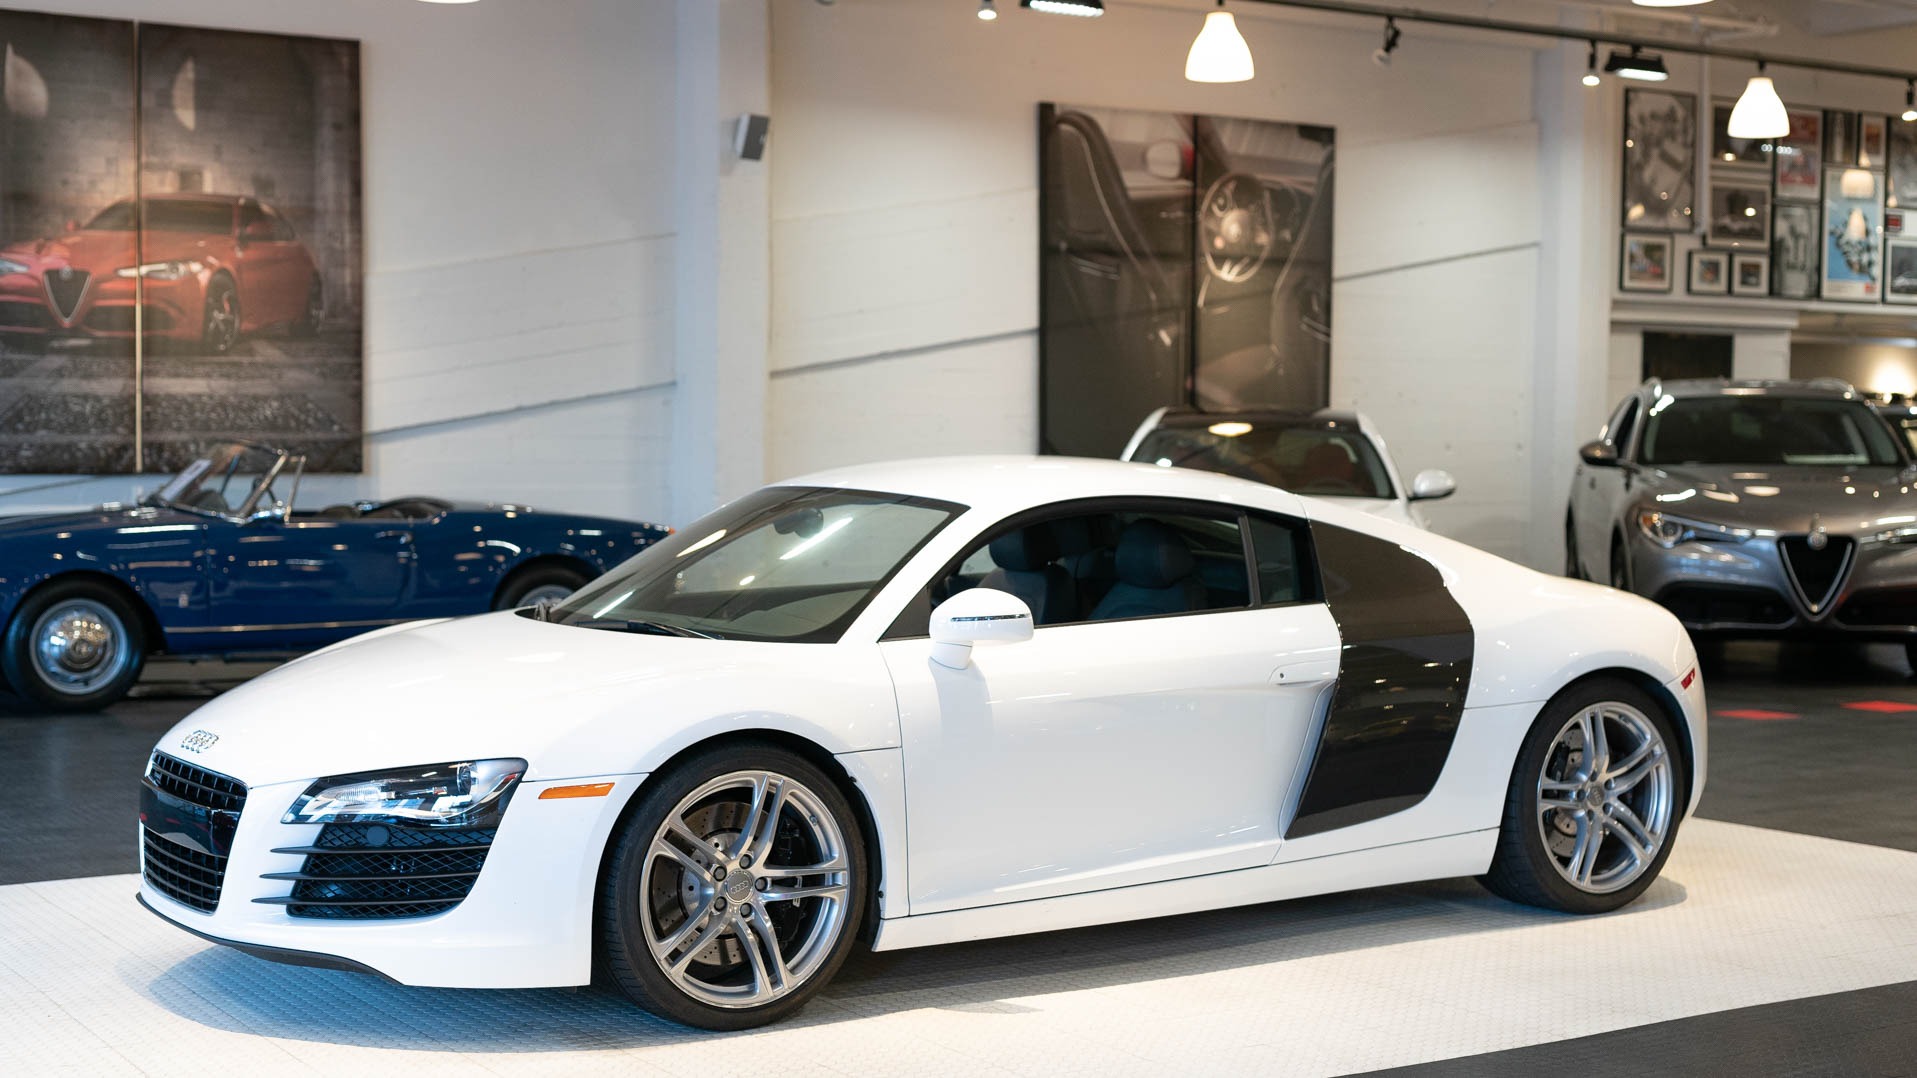 2012 r8 for sale